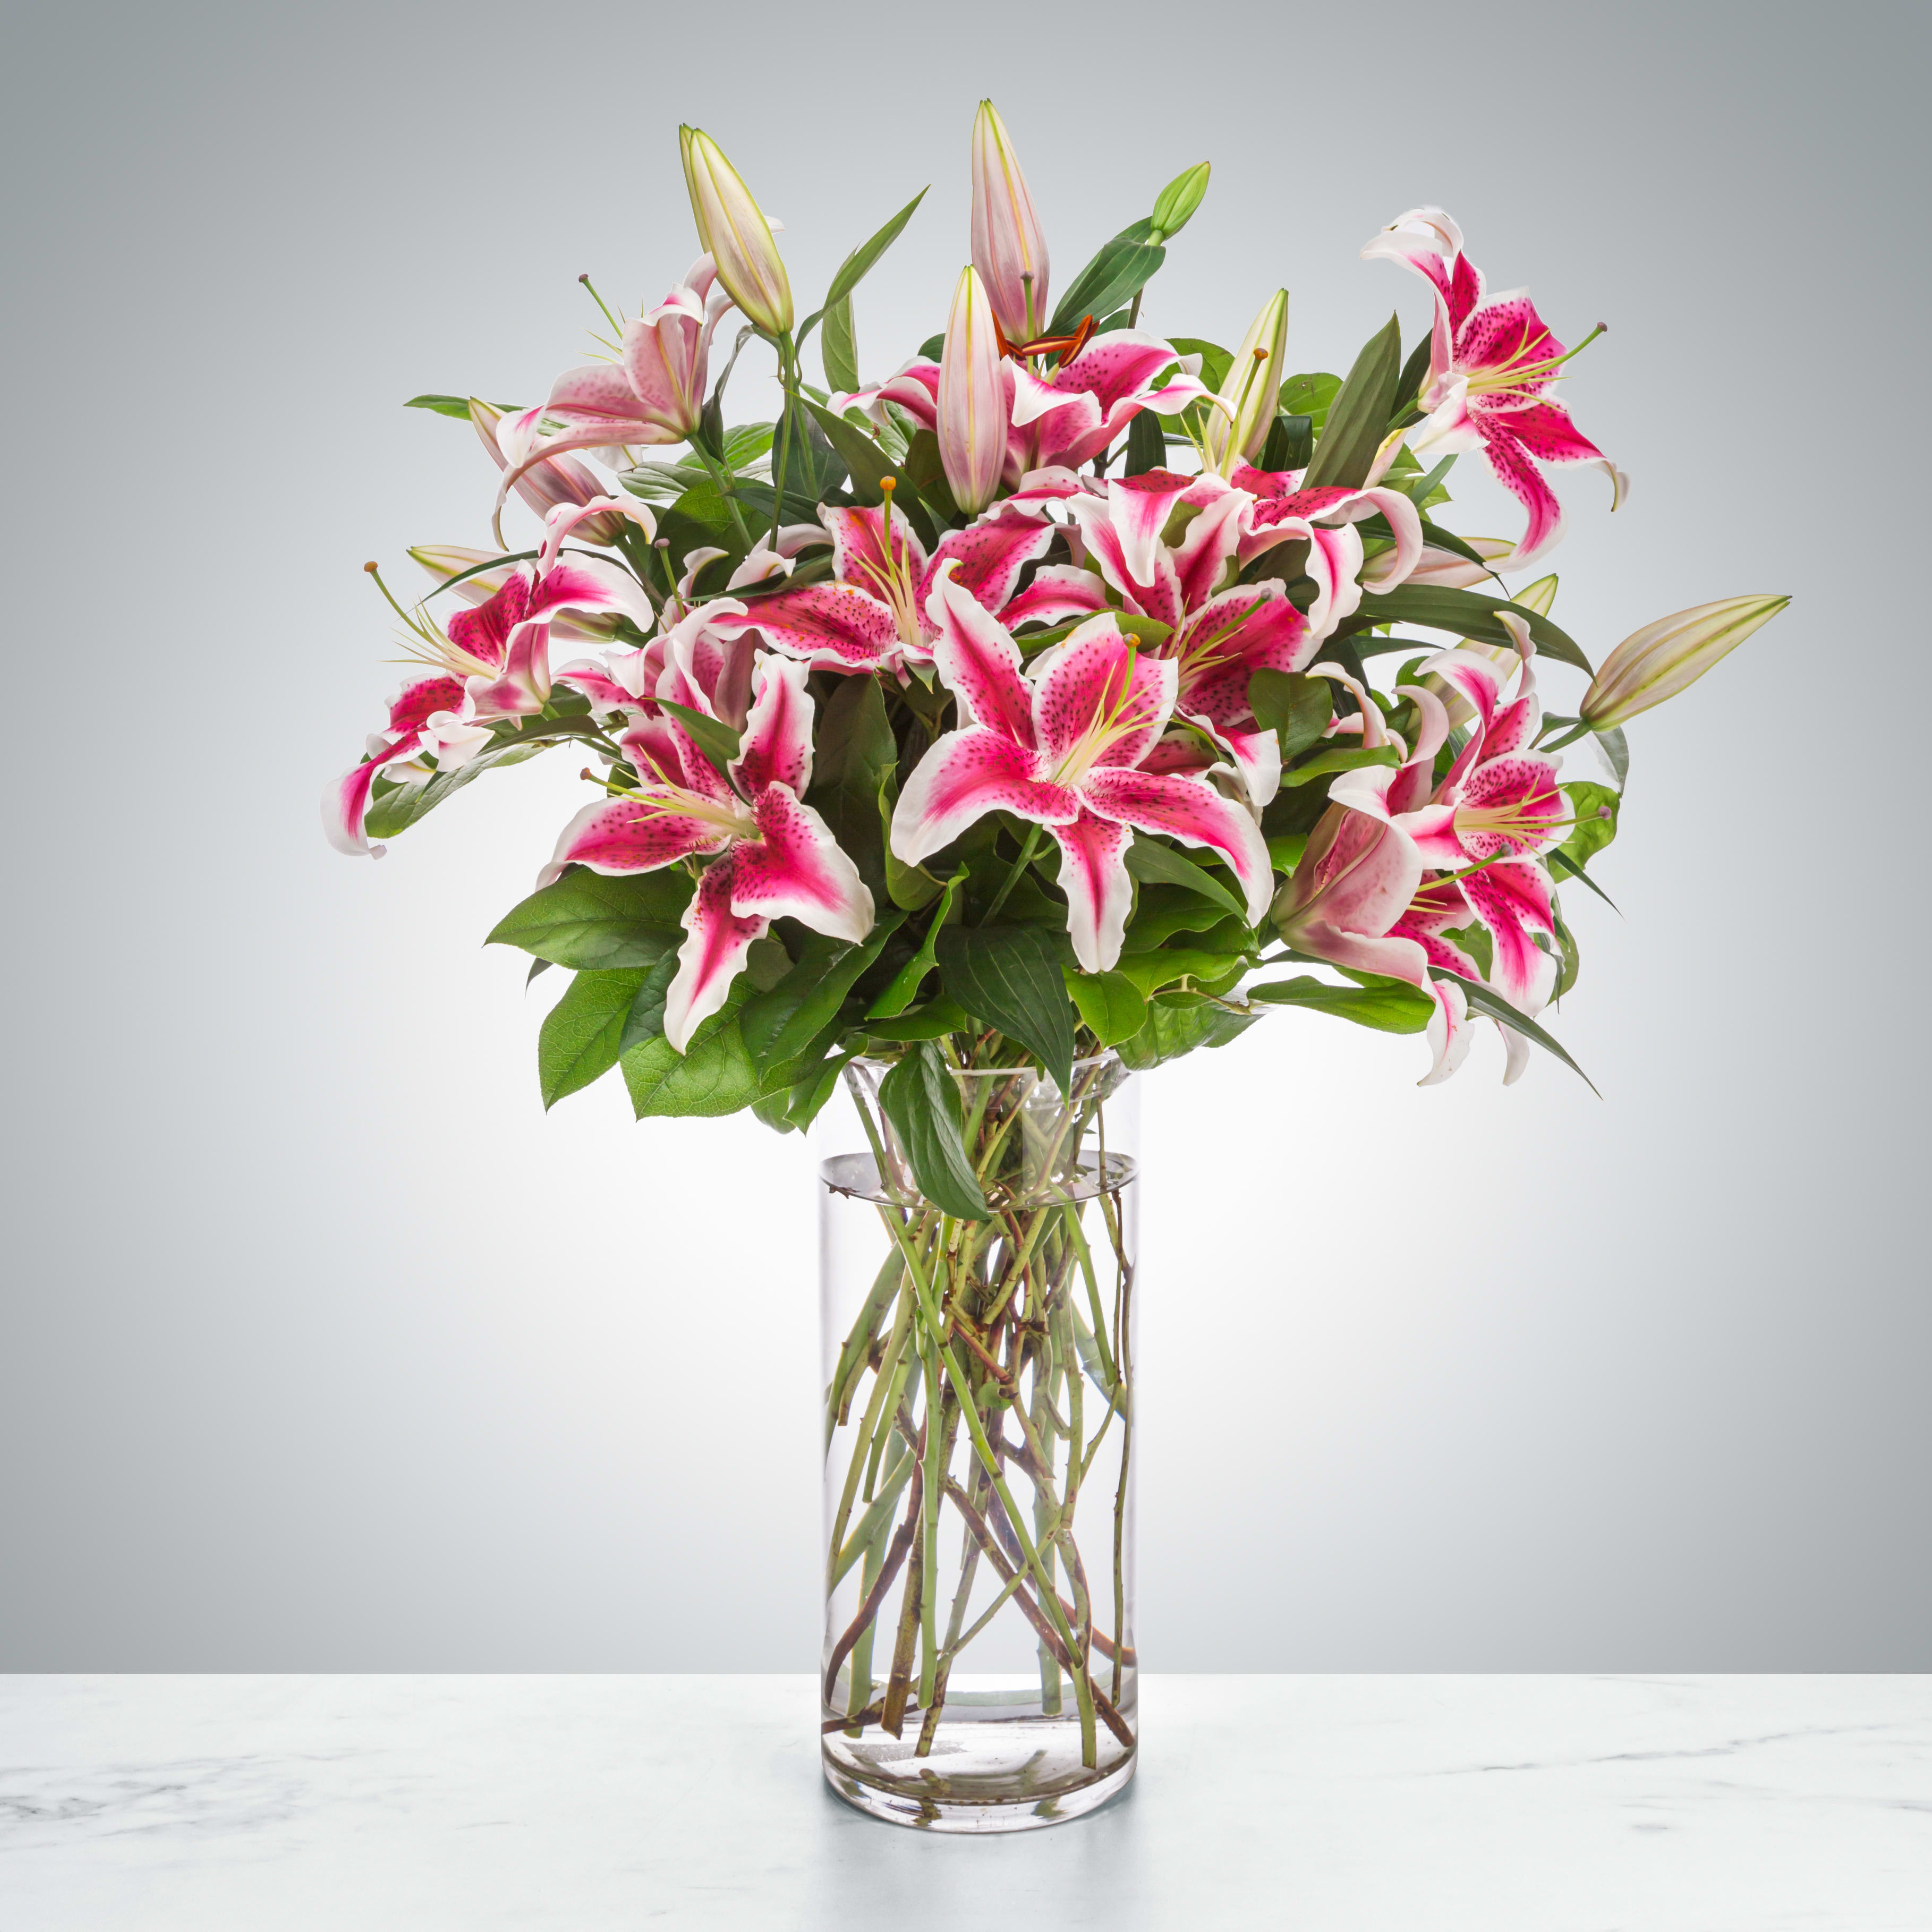 Splendent Stargazers by BloomNation™ - Pink lilies stand for love, admiration, compassion, and femininity. Send this sweet-smelling lily arrangement for Mother's Day, Women's Day, or an Anniversary.  1st Image: Standard 2nd Image: Premium